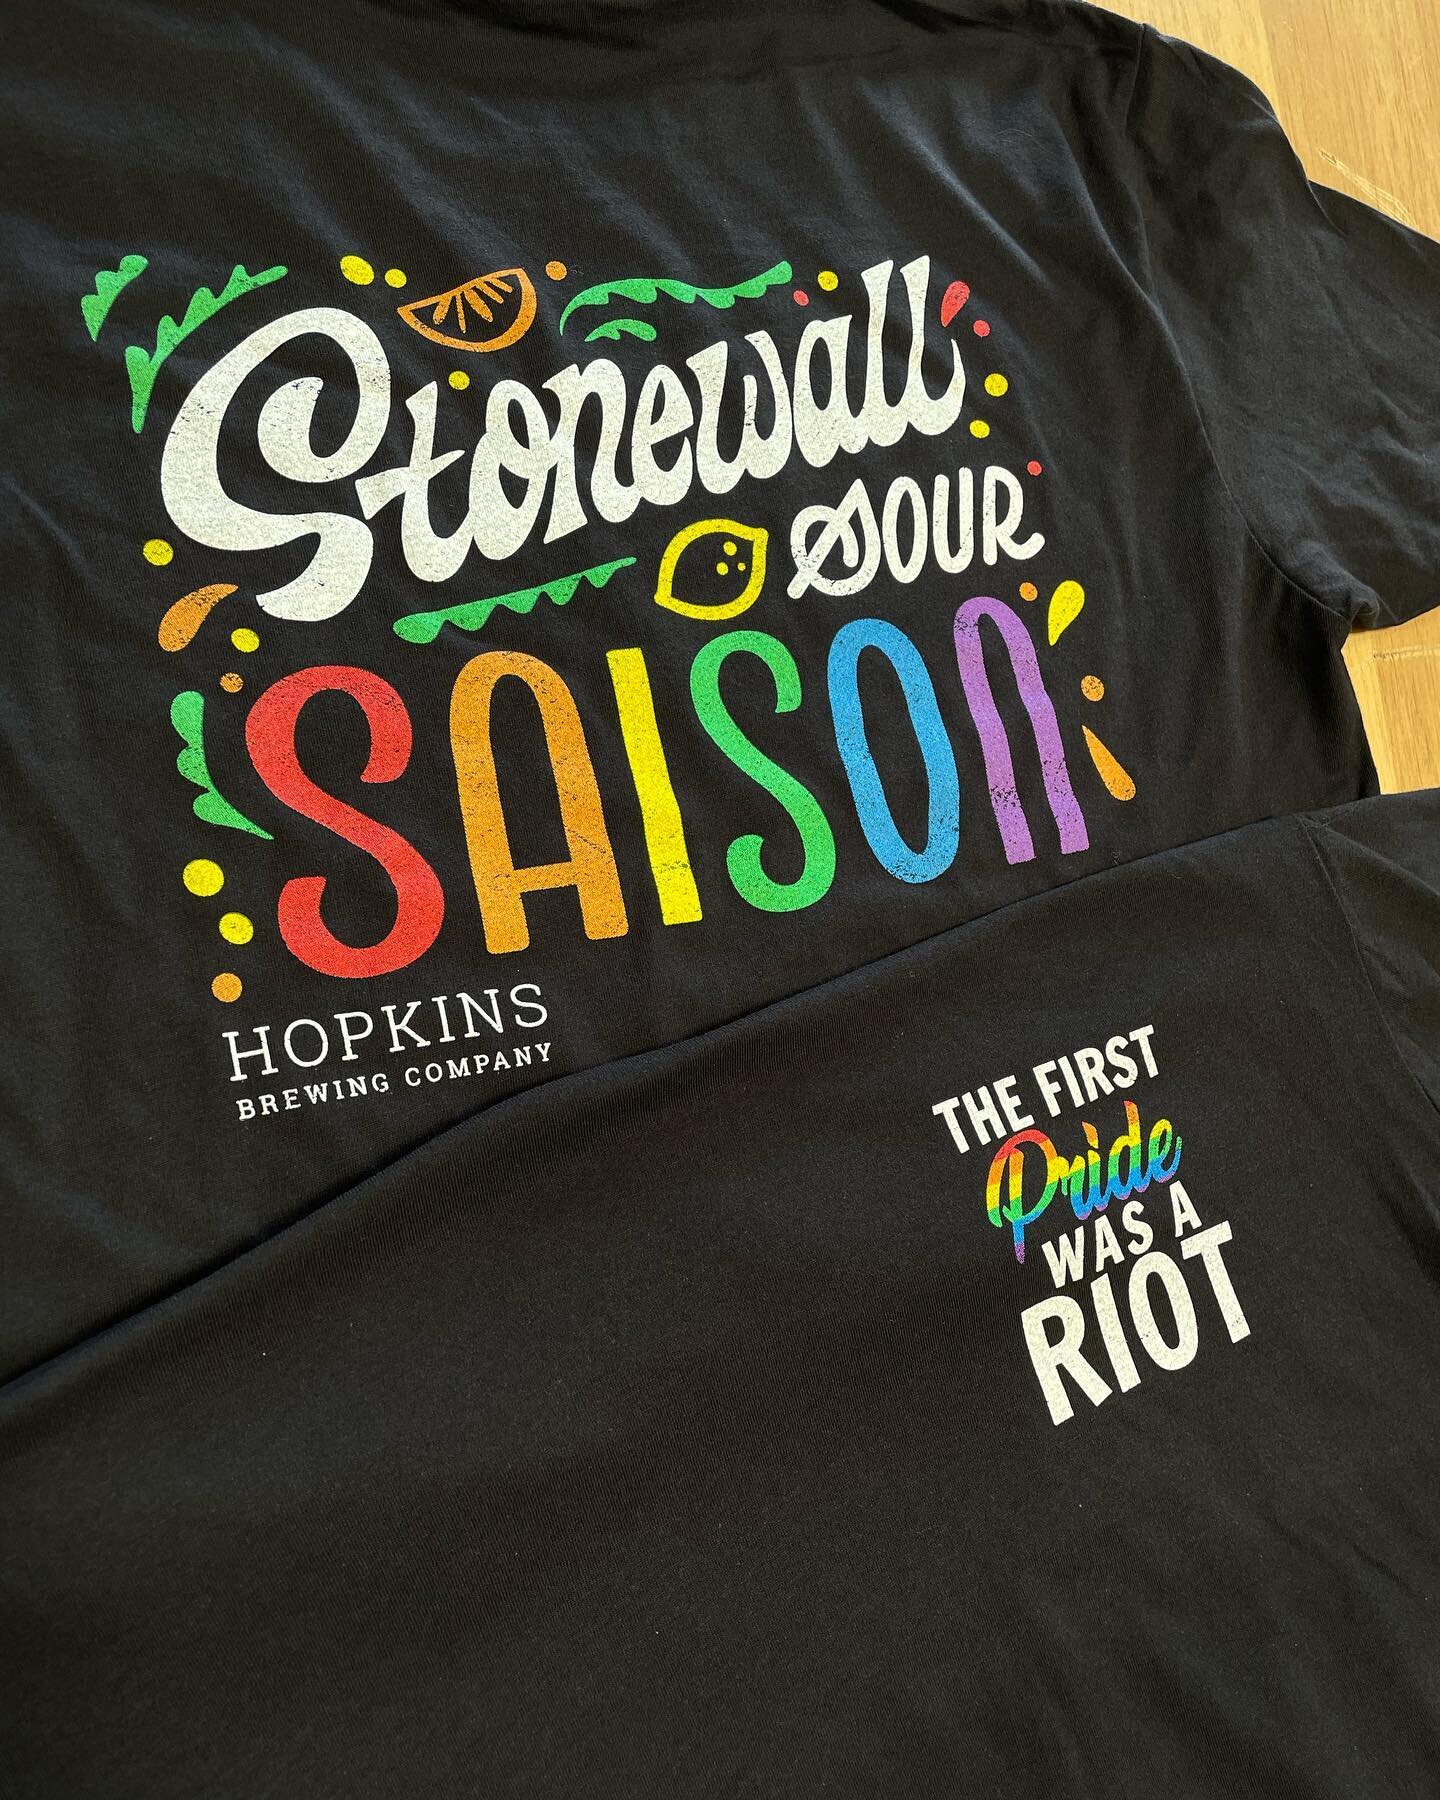 New shirts for @hopkinsbrewingco ! This was a fun project that took a little creative thinking to make come to life on our press.